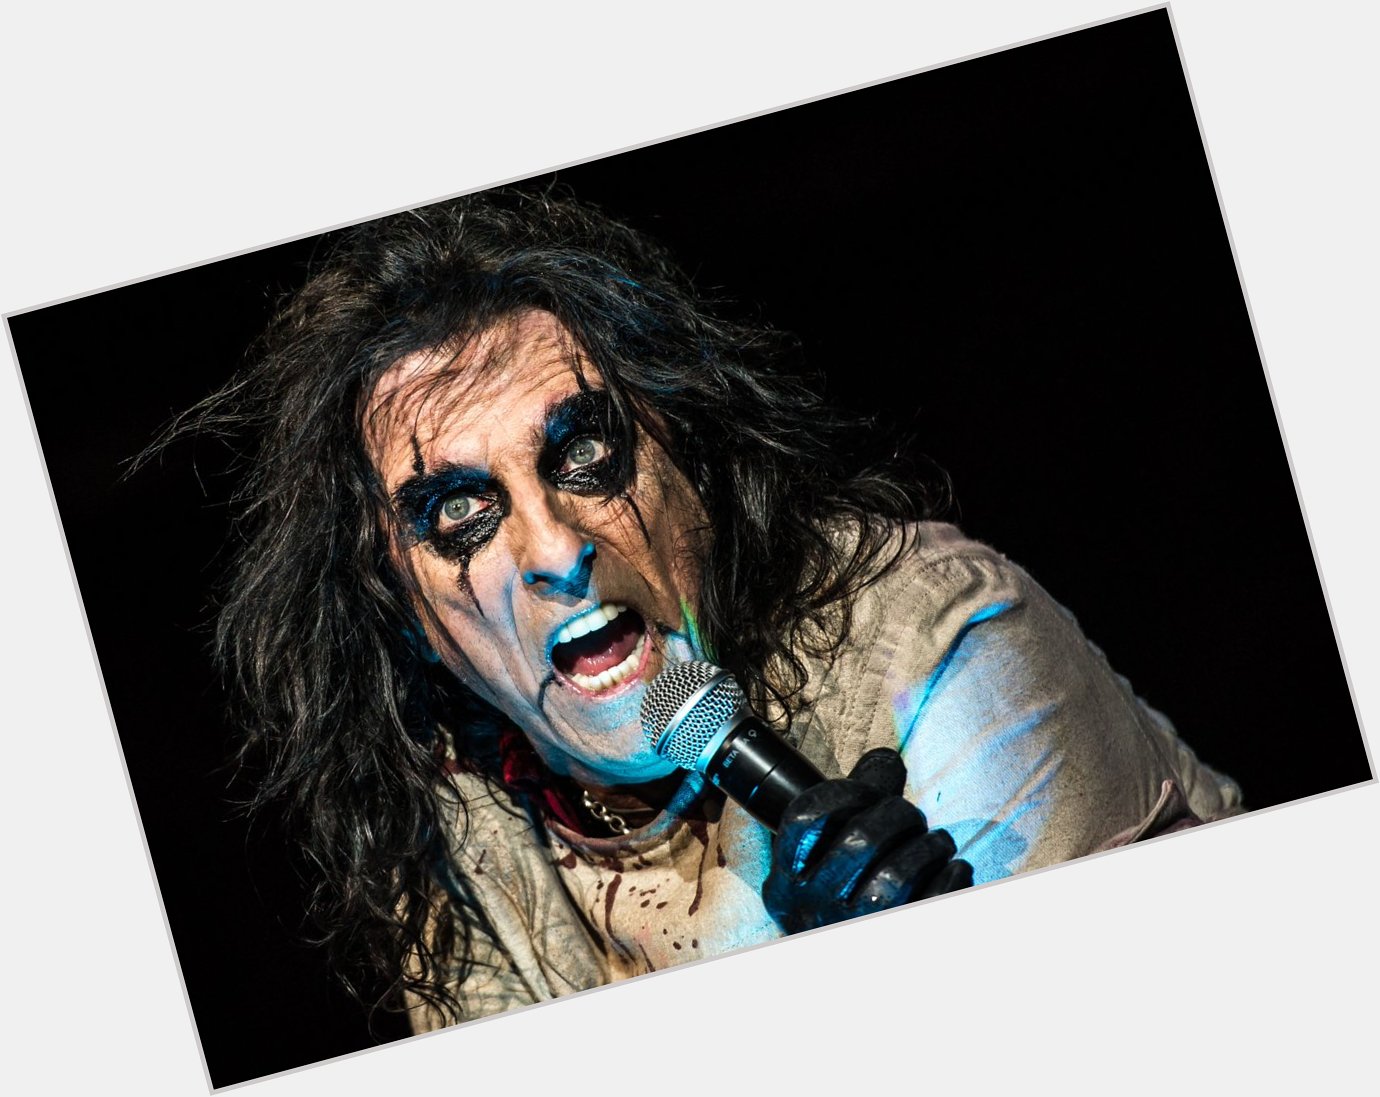 Happy birthday to shock rocker extraordinaire Alice Cooper! How many times have you seen him in concert? 